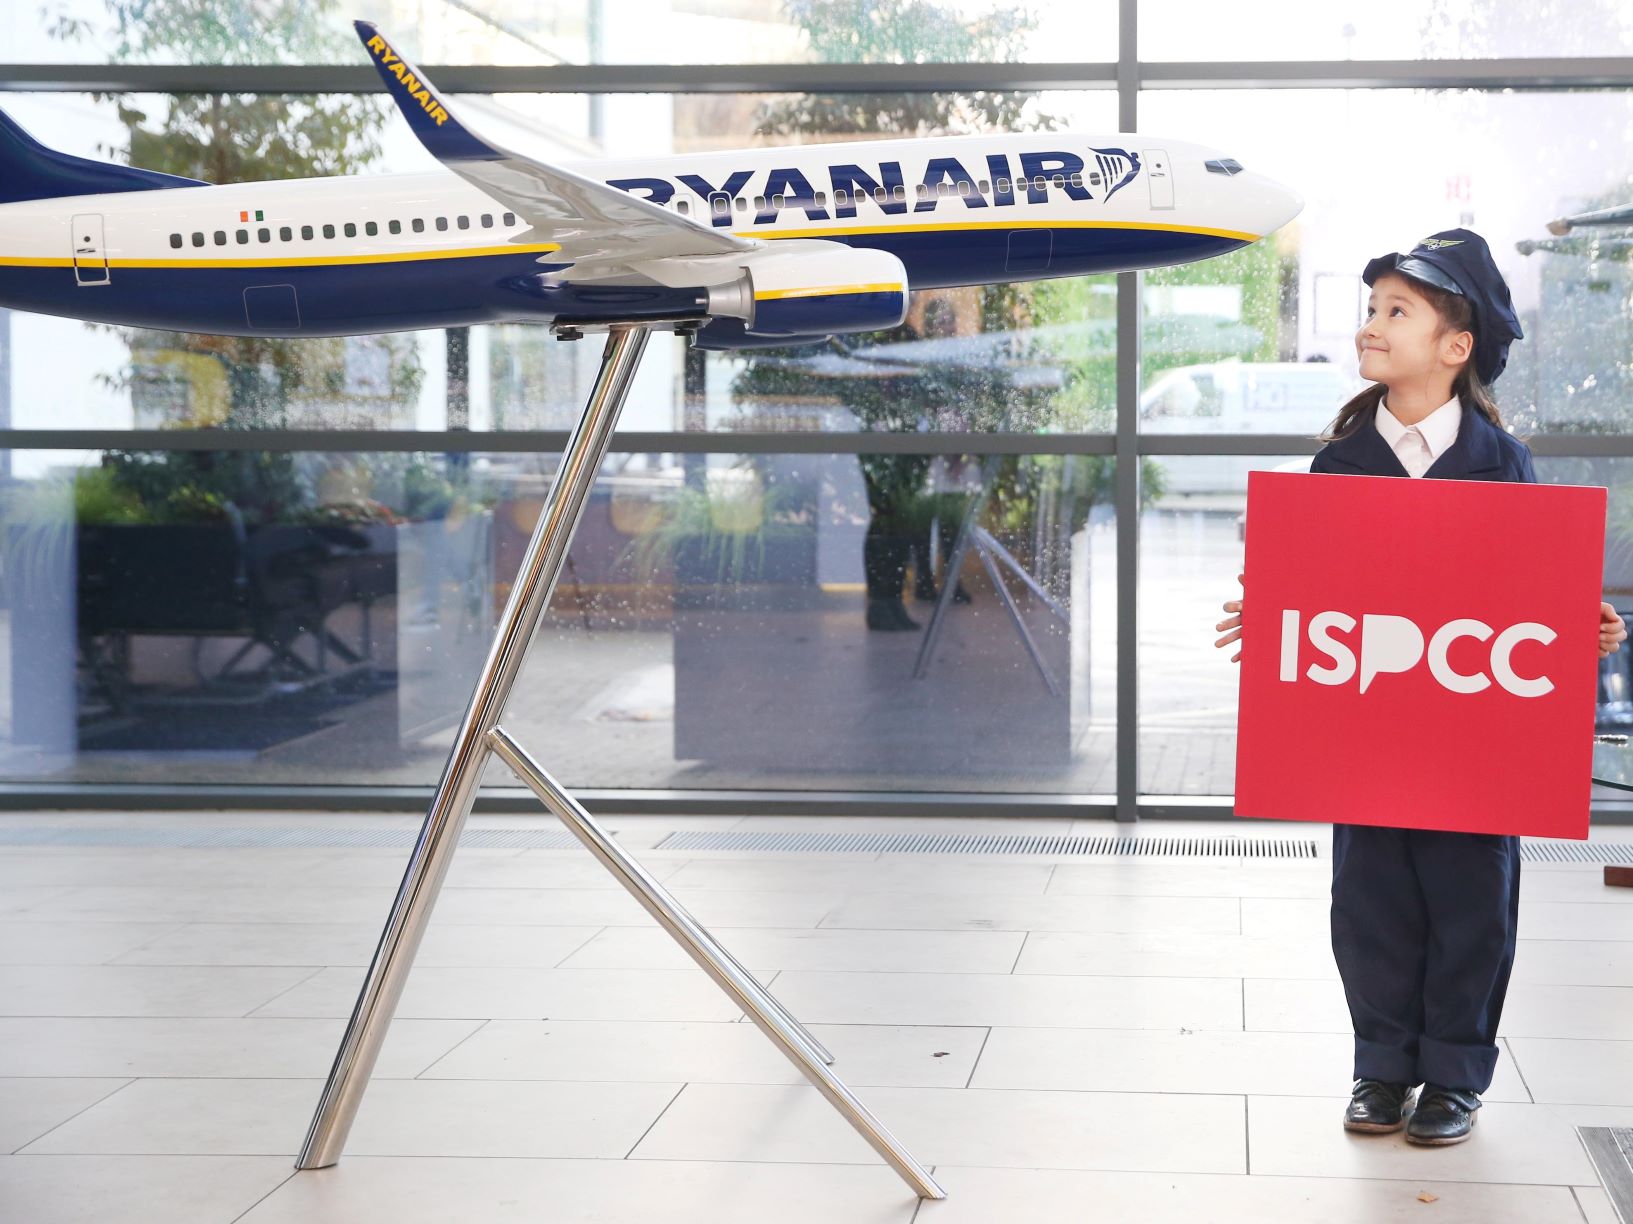 Ryanair Launches Holiday Competition In Aid Of ISPCC Childline  Name A Plane & Fly To Spain